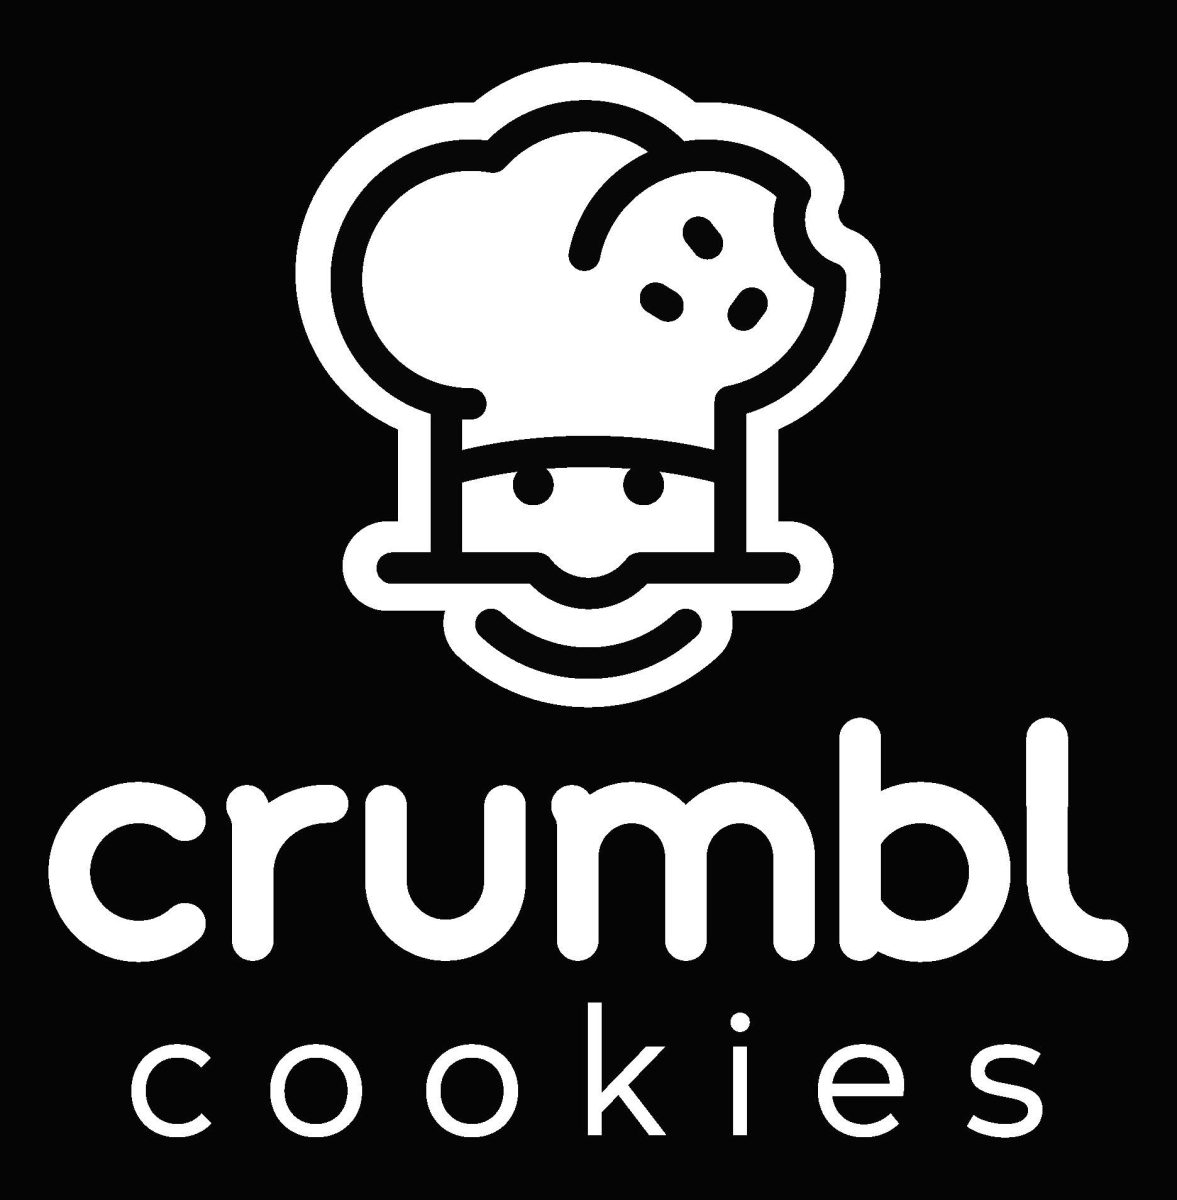 What Way Do You Like Your Crumbl Cookies?